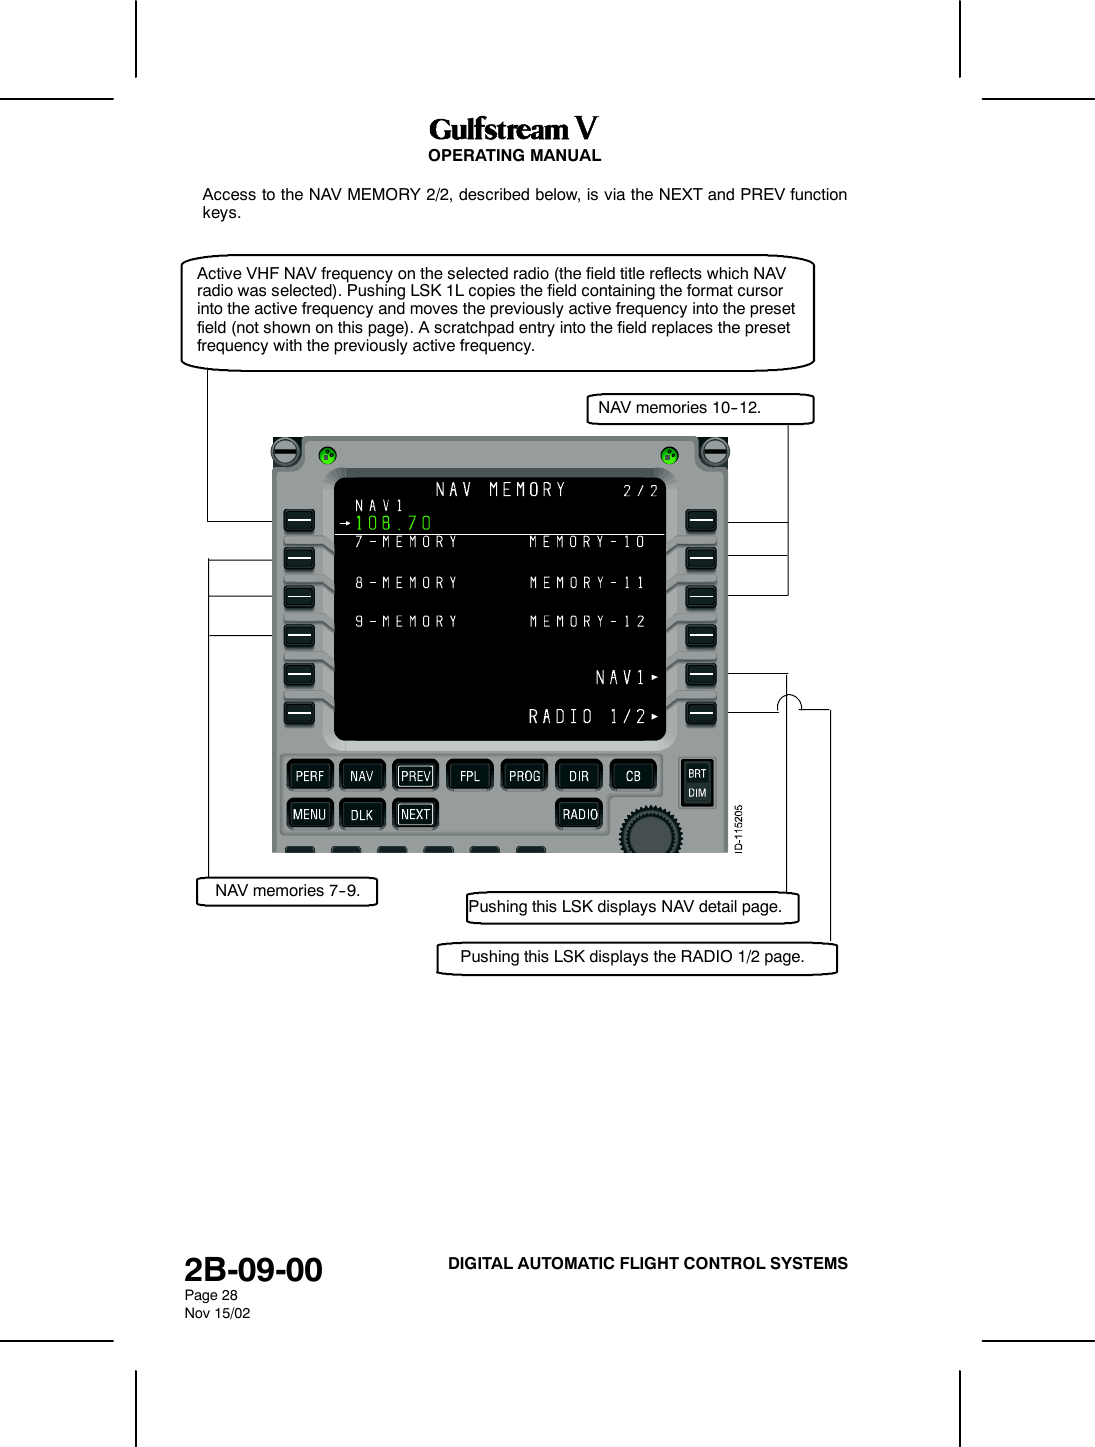 OPERATING MANUAL2B-09-00Page 28Nov 15/02DIGITAL AUTOMATIC FLIGHT CONTROL SYSTEMSAccess to the NAV MEMORY 2/2, described below, is via the NEXT and PREV functionkeys.Active VHF NAV frequency on the selected radio (the field title reflects which NAVradio was selected). Pushing LSK 1L copies the field containing the format cursorinto the active frequency and moves the previously active frequency into the presetfield (not shown on this page). A scratchpad entry into the field replaces the presetfrequency with the previously active frequency.NAV memories 10--12.NAV memories 7--9.Pushing this LSK displays NAV detail page.Pushing this LSK displays the RADIO 1/2 page.